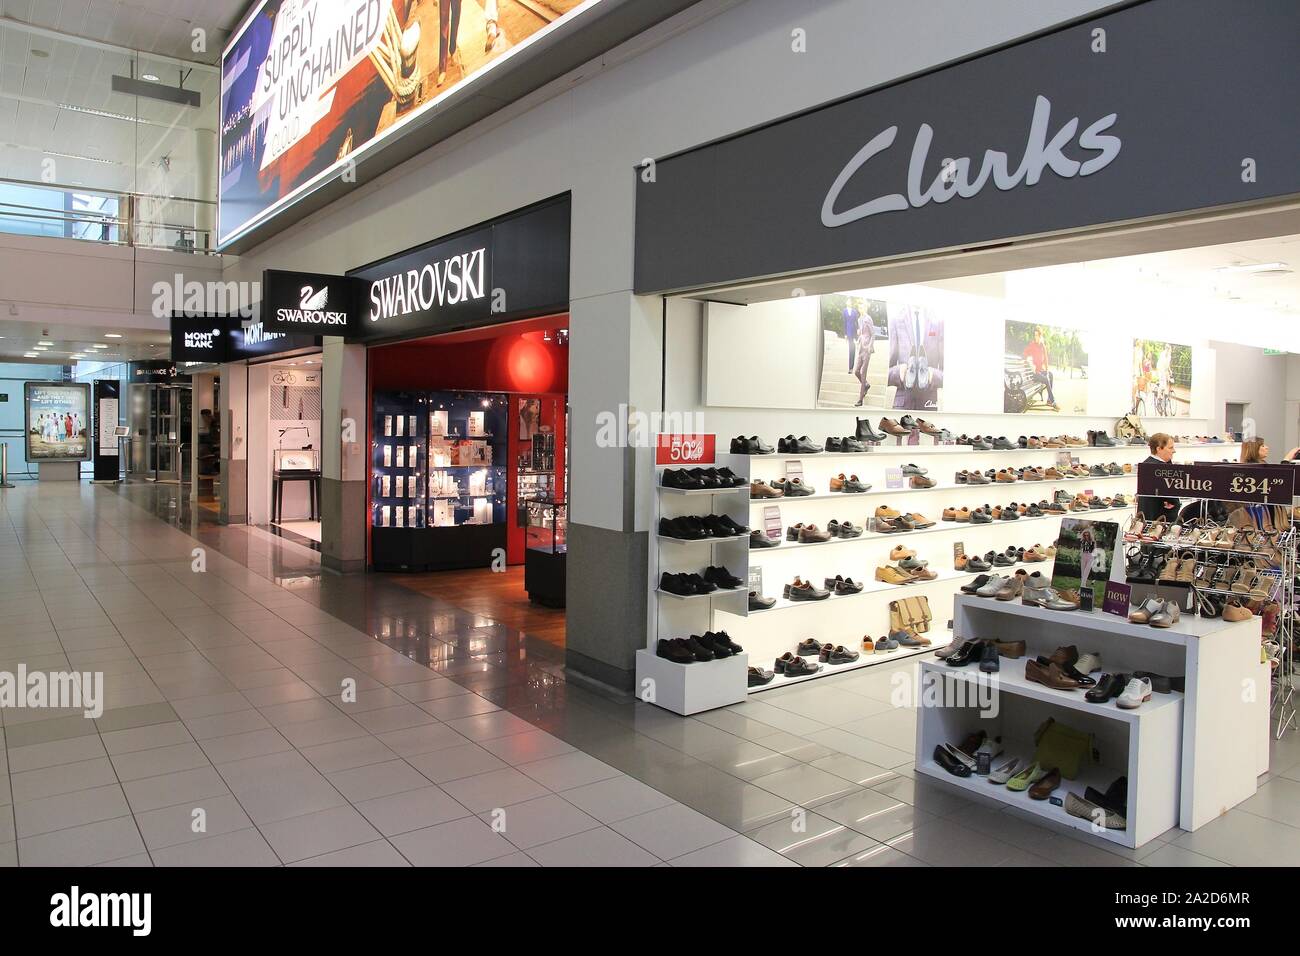 LONDON, UK - APRIL 16, 2014: Mont Blanc, Swarovski and Clarks stores at  London Heathrow Airport, UK. Heathrow is the busiest airport in Europe. It  han Stock Photo - Alamy